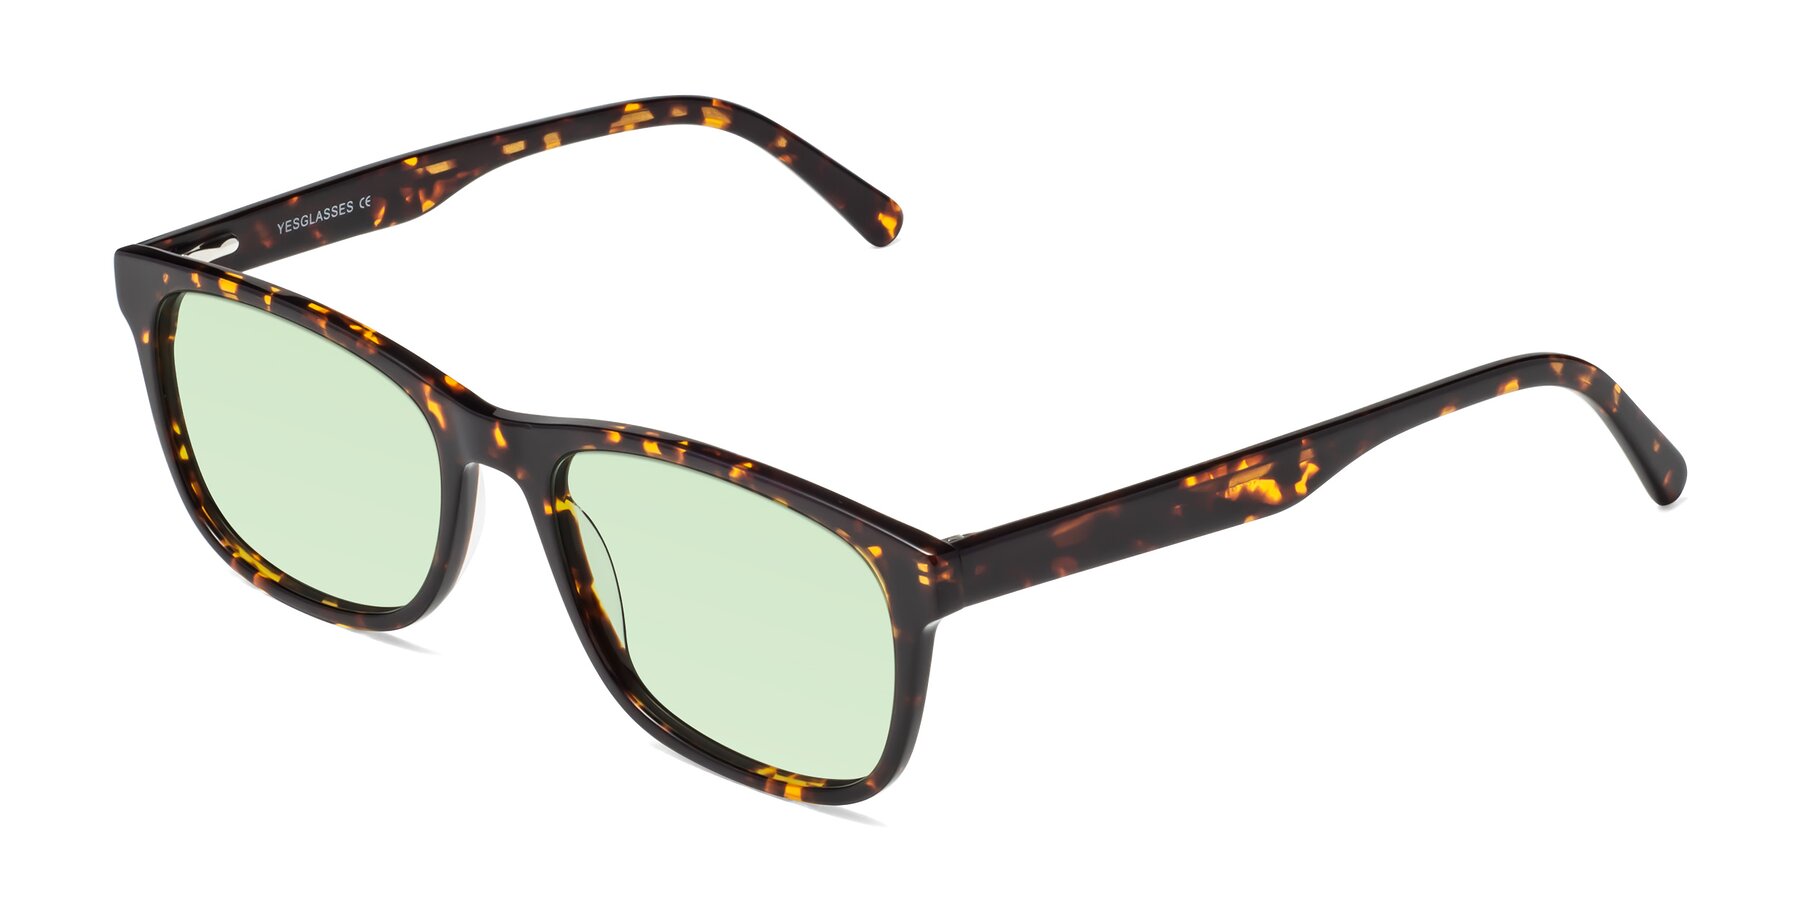 Angle of Navarro in Chocolate-Tortoise with Light Green Tinted Lenses